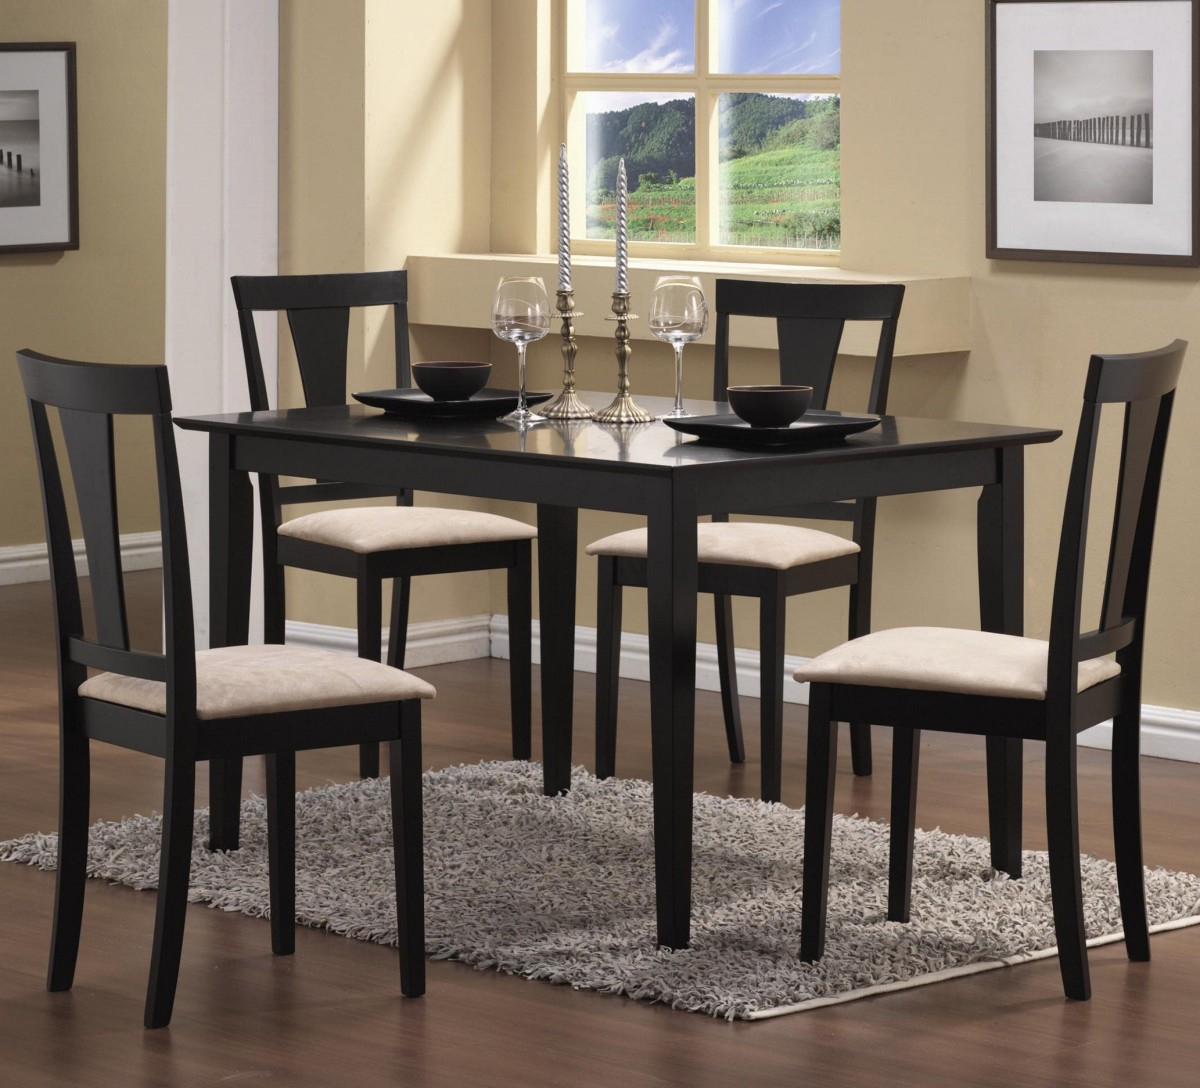 Dining Table Sets At Big Lots • Faucet Ideas Site